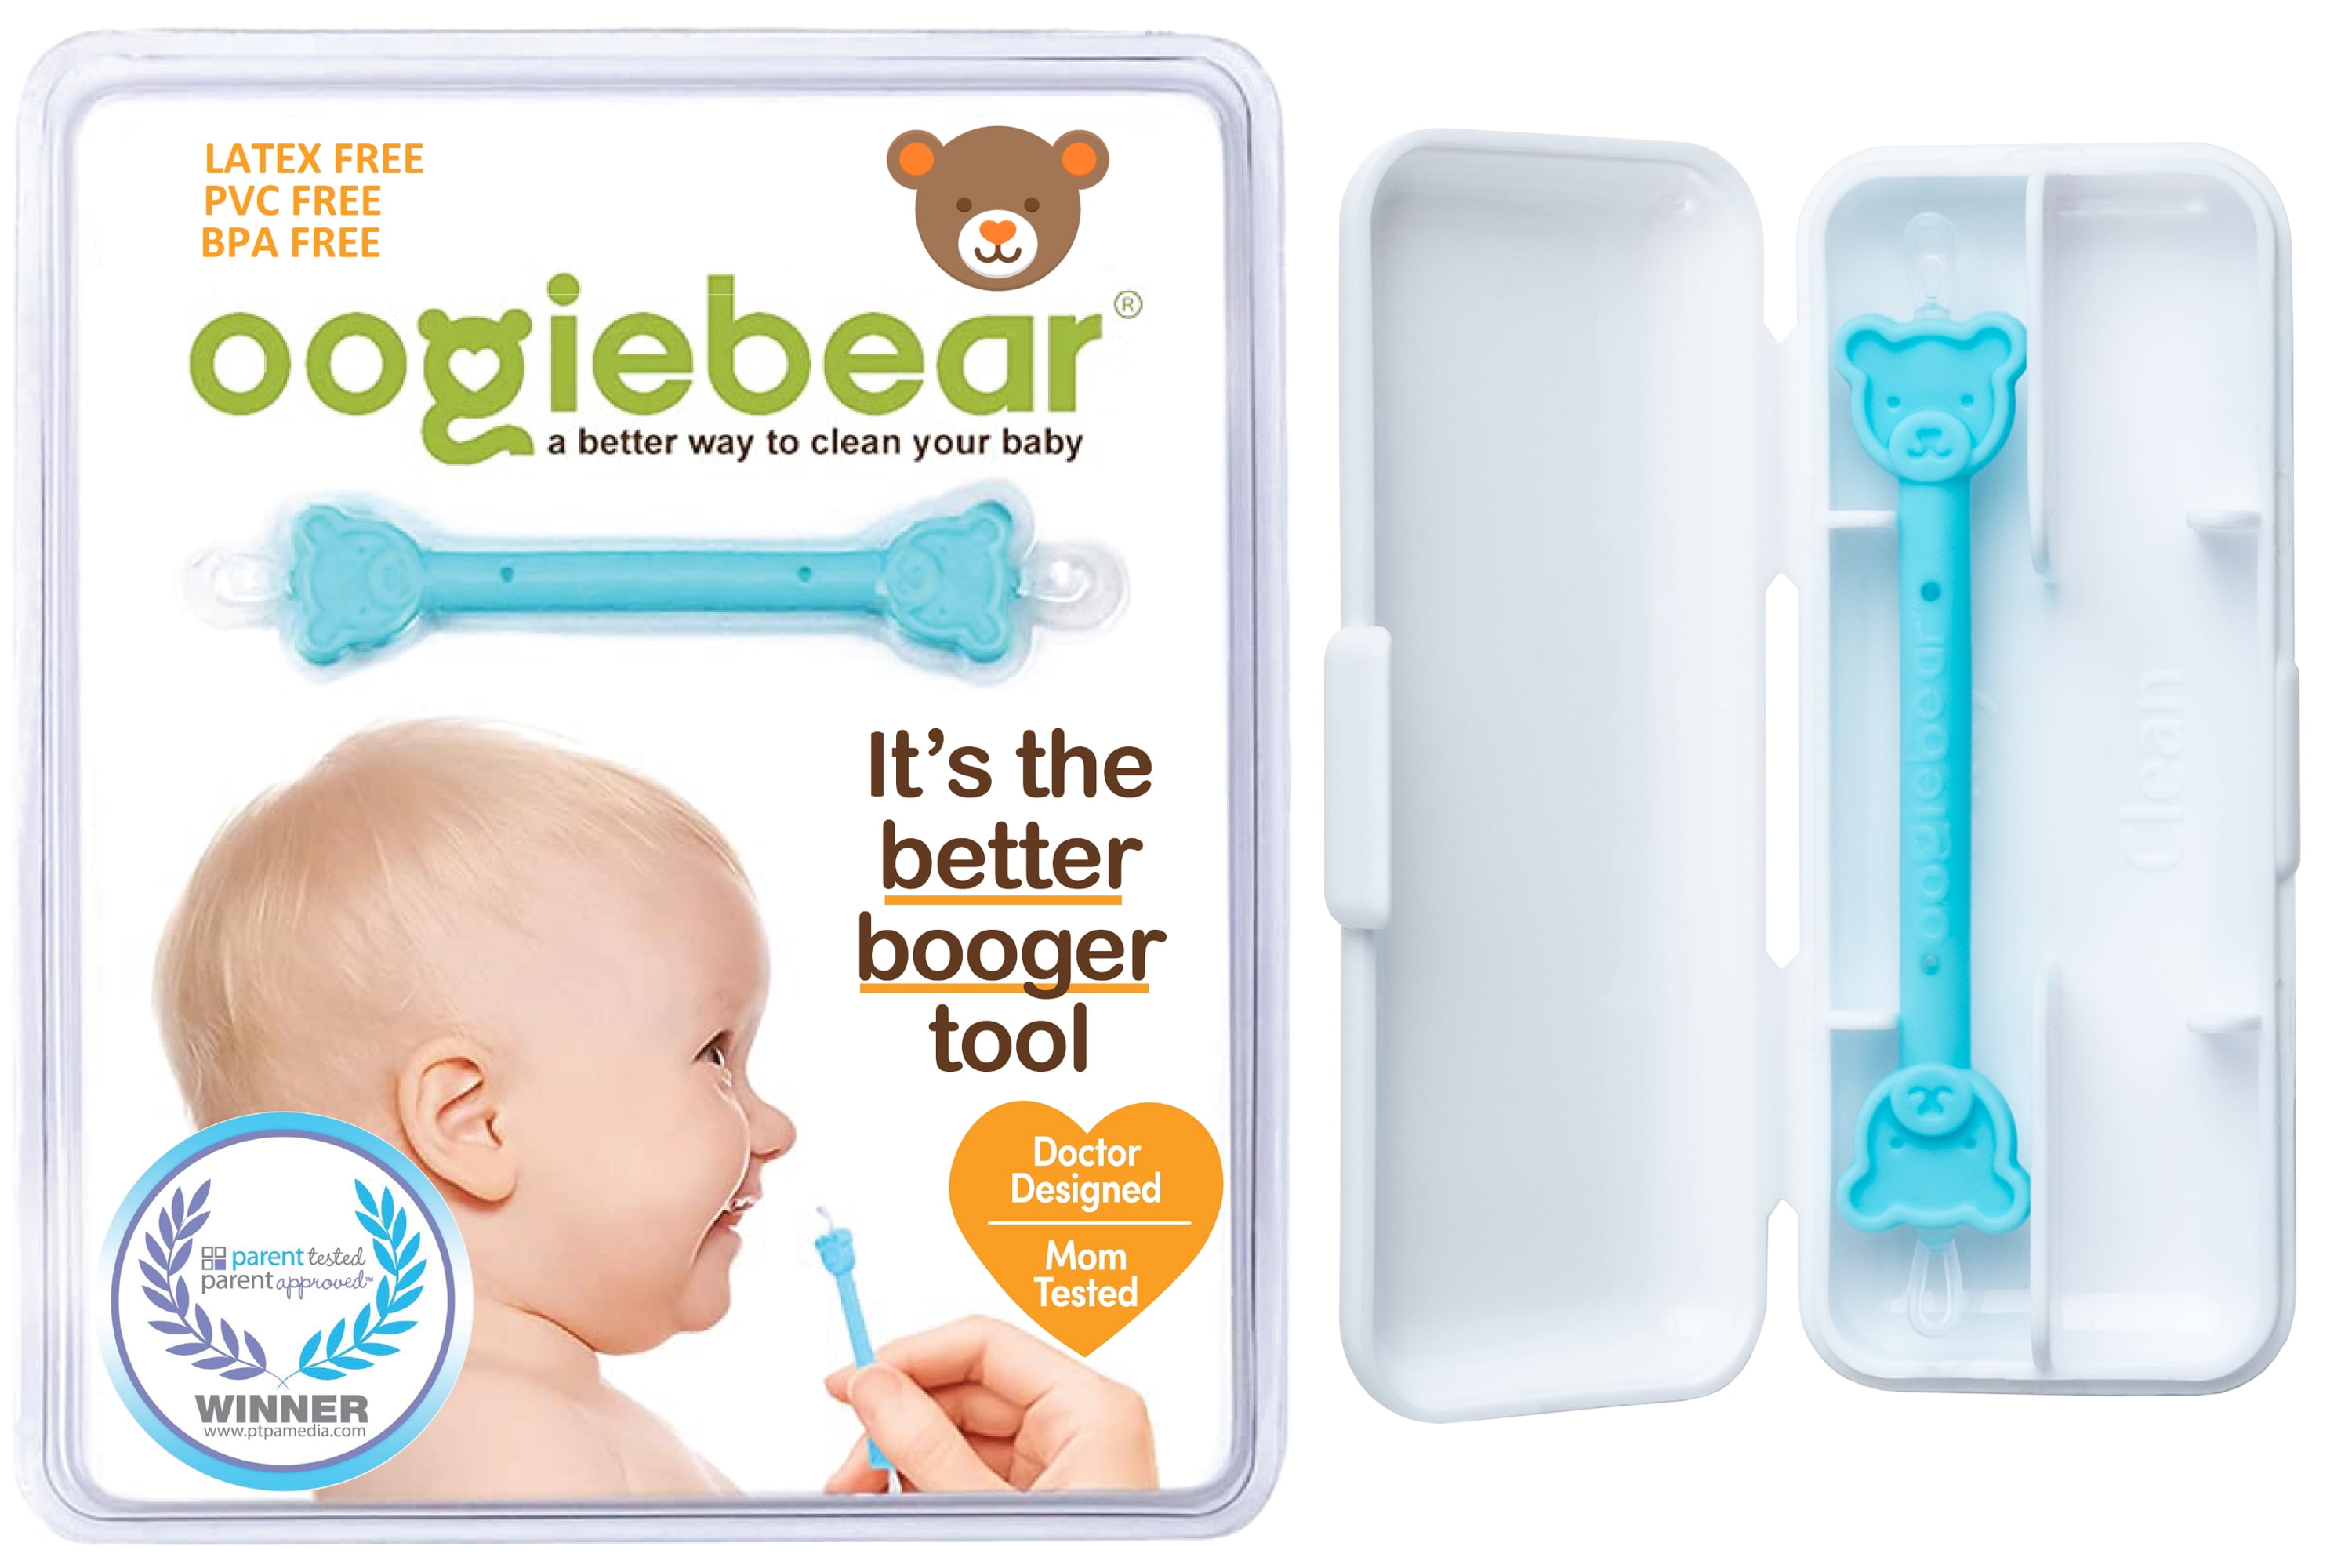 oogiebear Baby Ear & Nose Cleaner, with Case. Dual Earwax and Snot Remover. Aspirator Alternative.